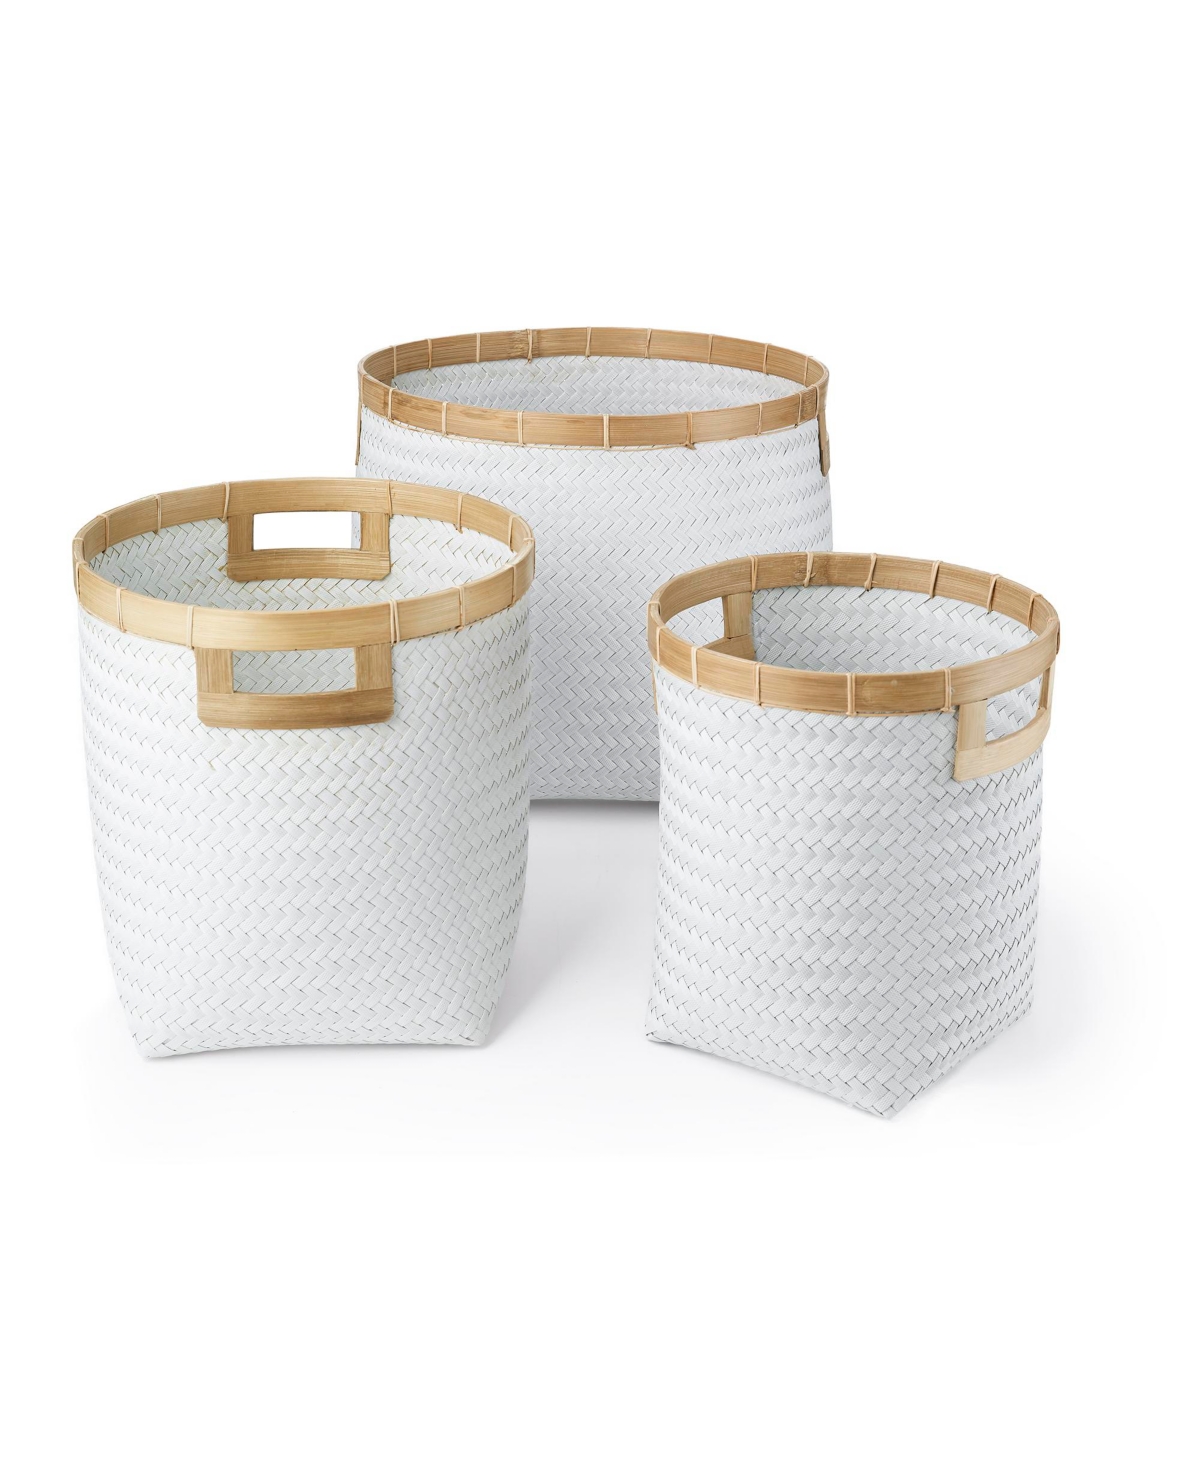 3 Piece Round Top and Square Bottom Bamboo Basket Set with Cut-Out Handles, Natural Rim - Dark Gray